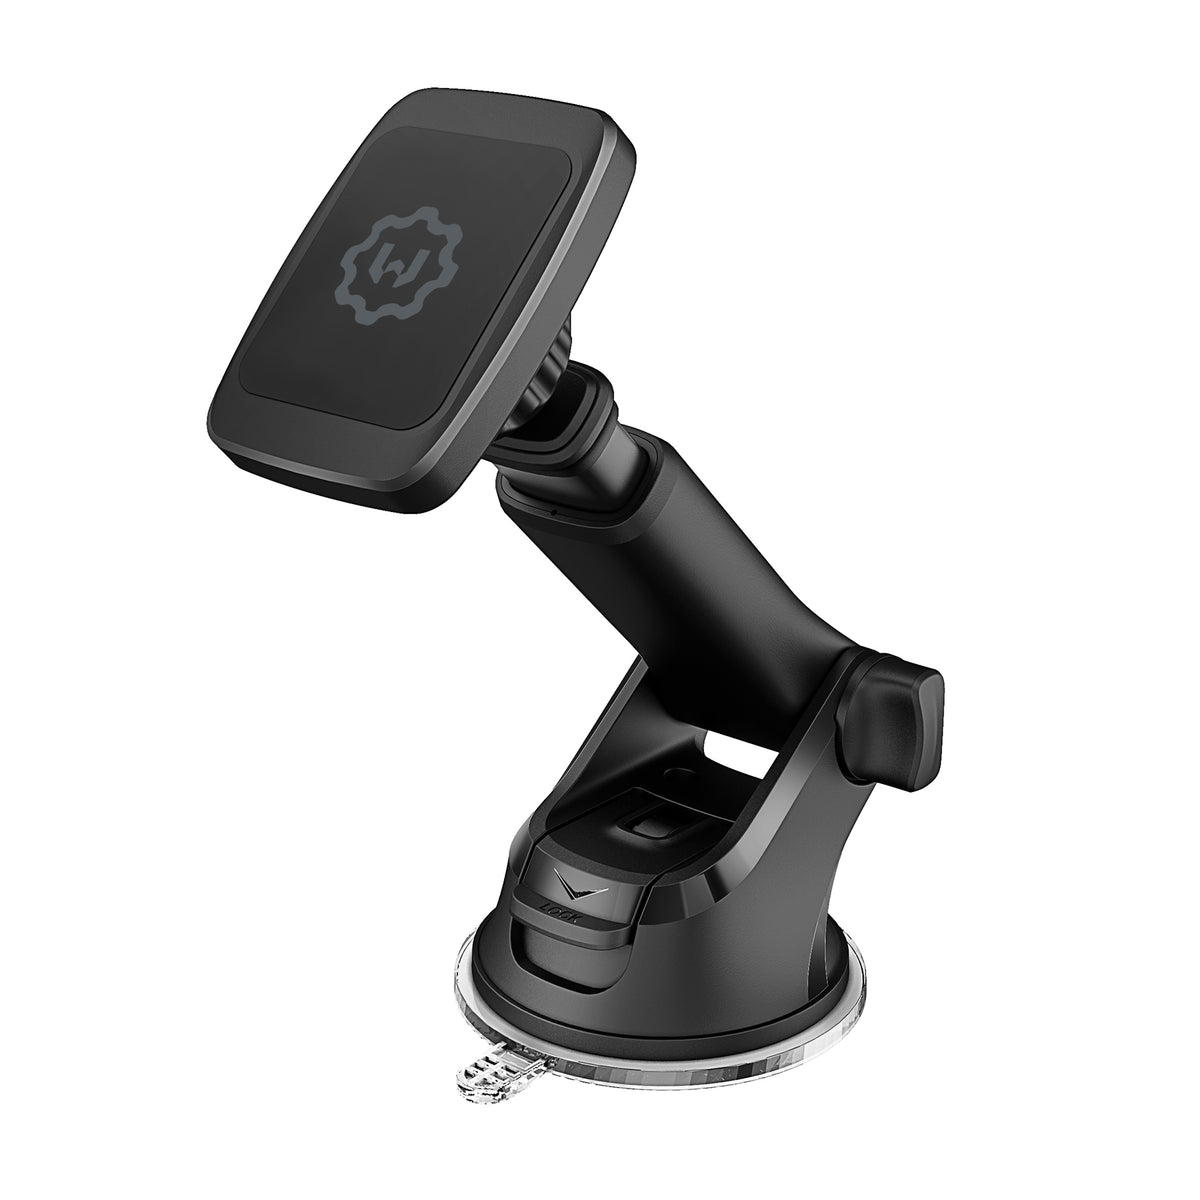 WixGear Universal Airplane in Flight Tablet Phone Mount, Handsfree Phone  Holder for Desk with Multi-Directional Dual 360 Degree Rotation, Pocket  Size